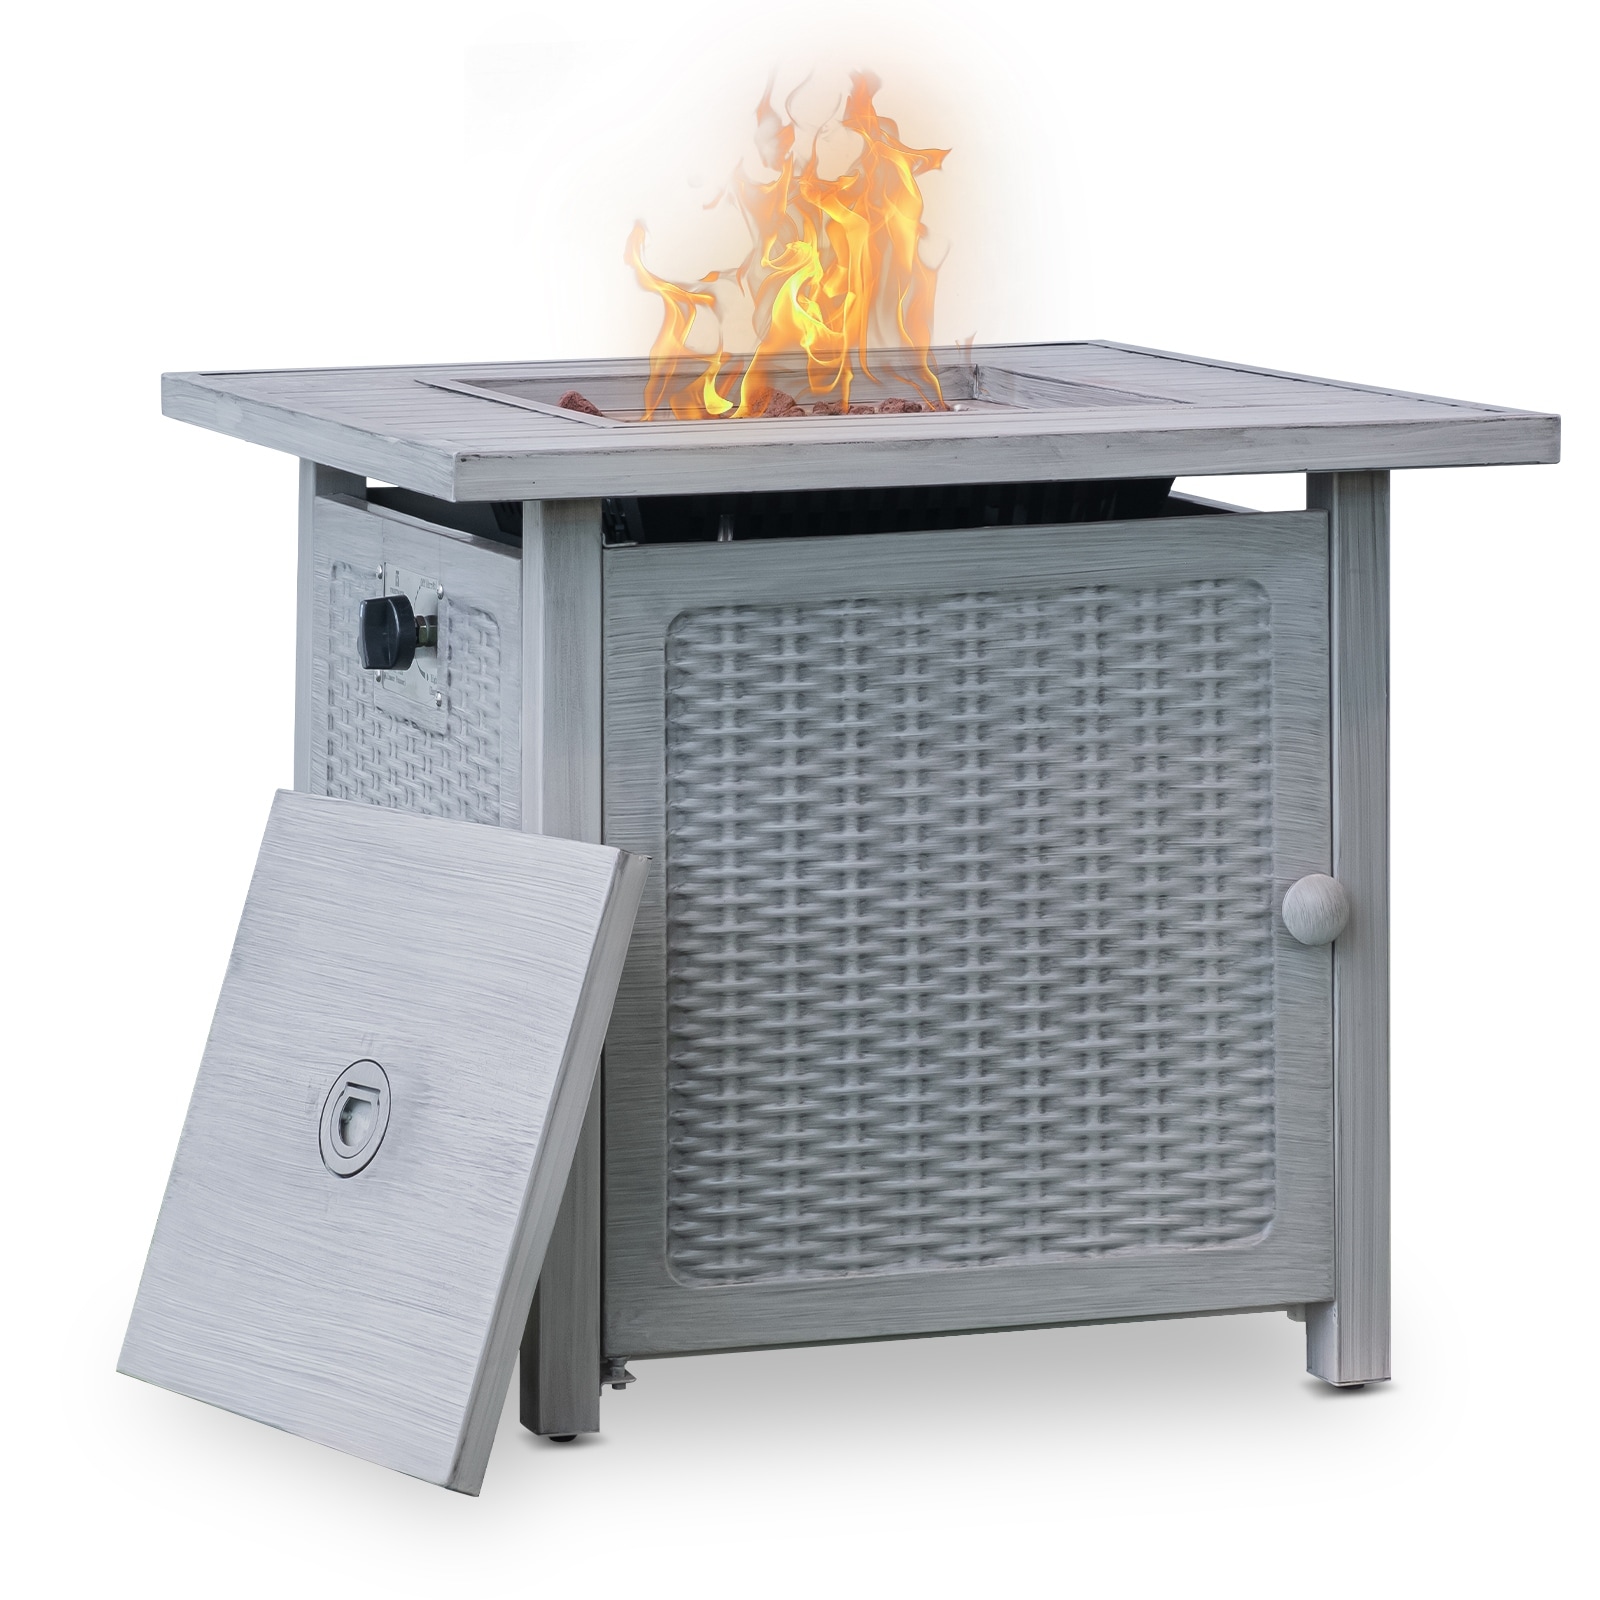 28 inch Slat Top Gas Fire Pit Table-Light Gray